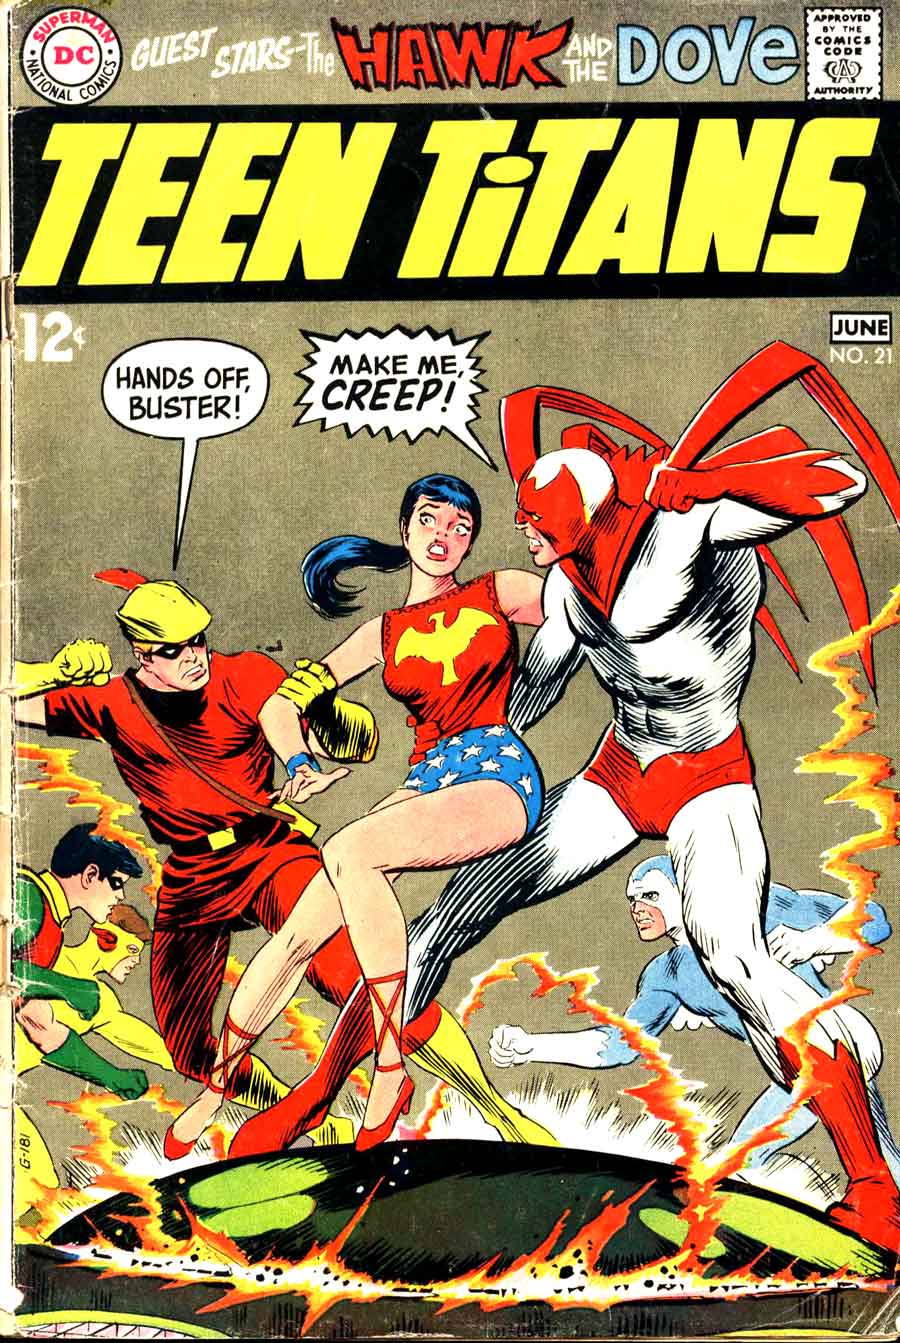 Teen Titans v1 #21 dc comic book cover art by Nick Cardy